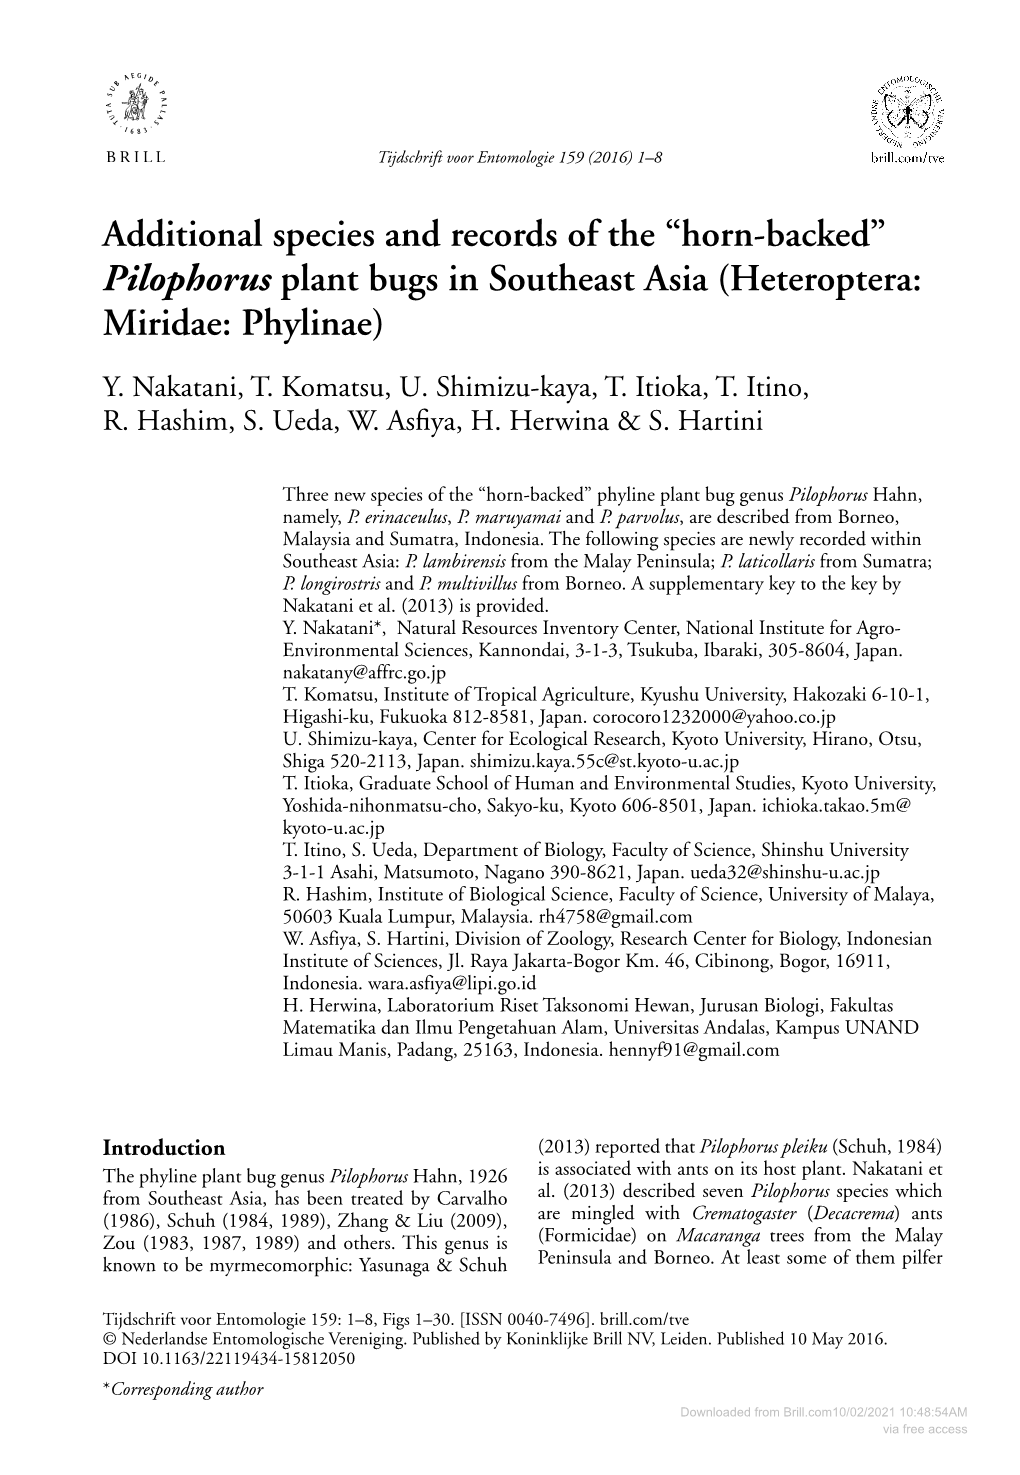 Additional Species and Records of the “Horn-Backed” Pilophorus Plant Bugs in Southeast Asia (Heteroptera: Miridae: Phylinae) Y